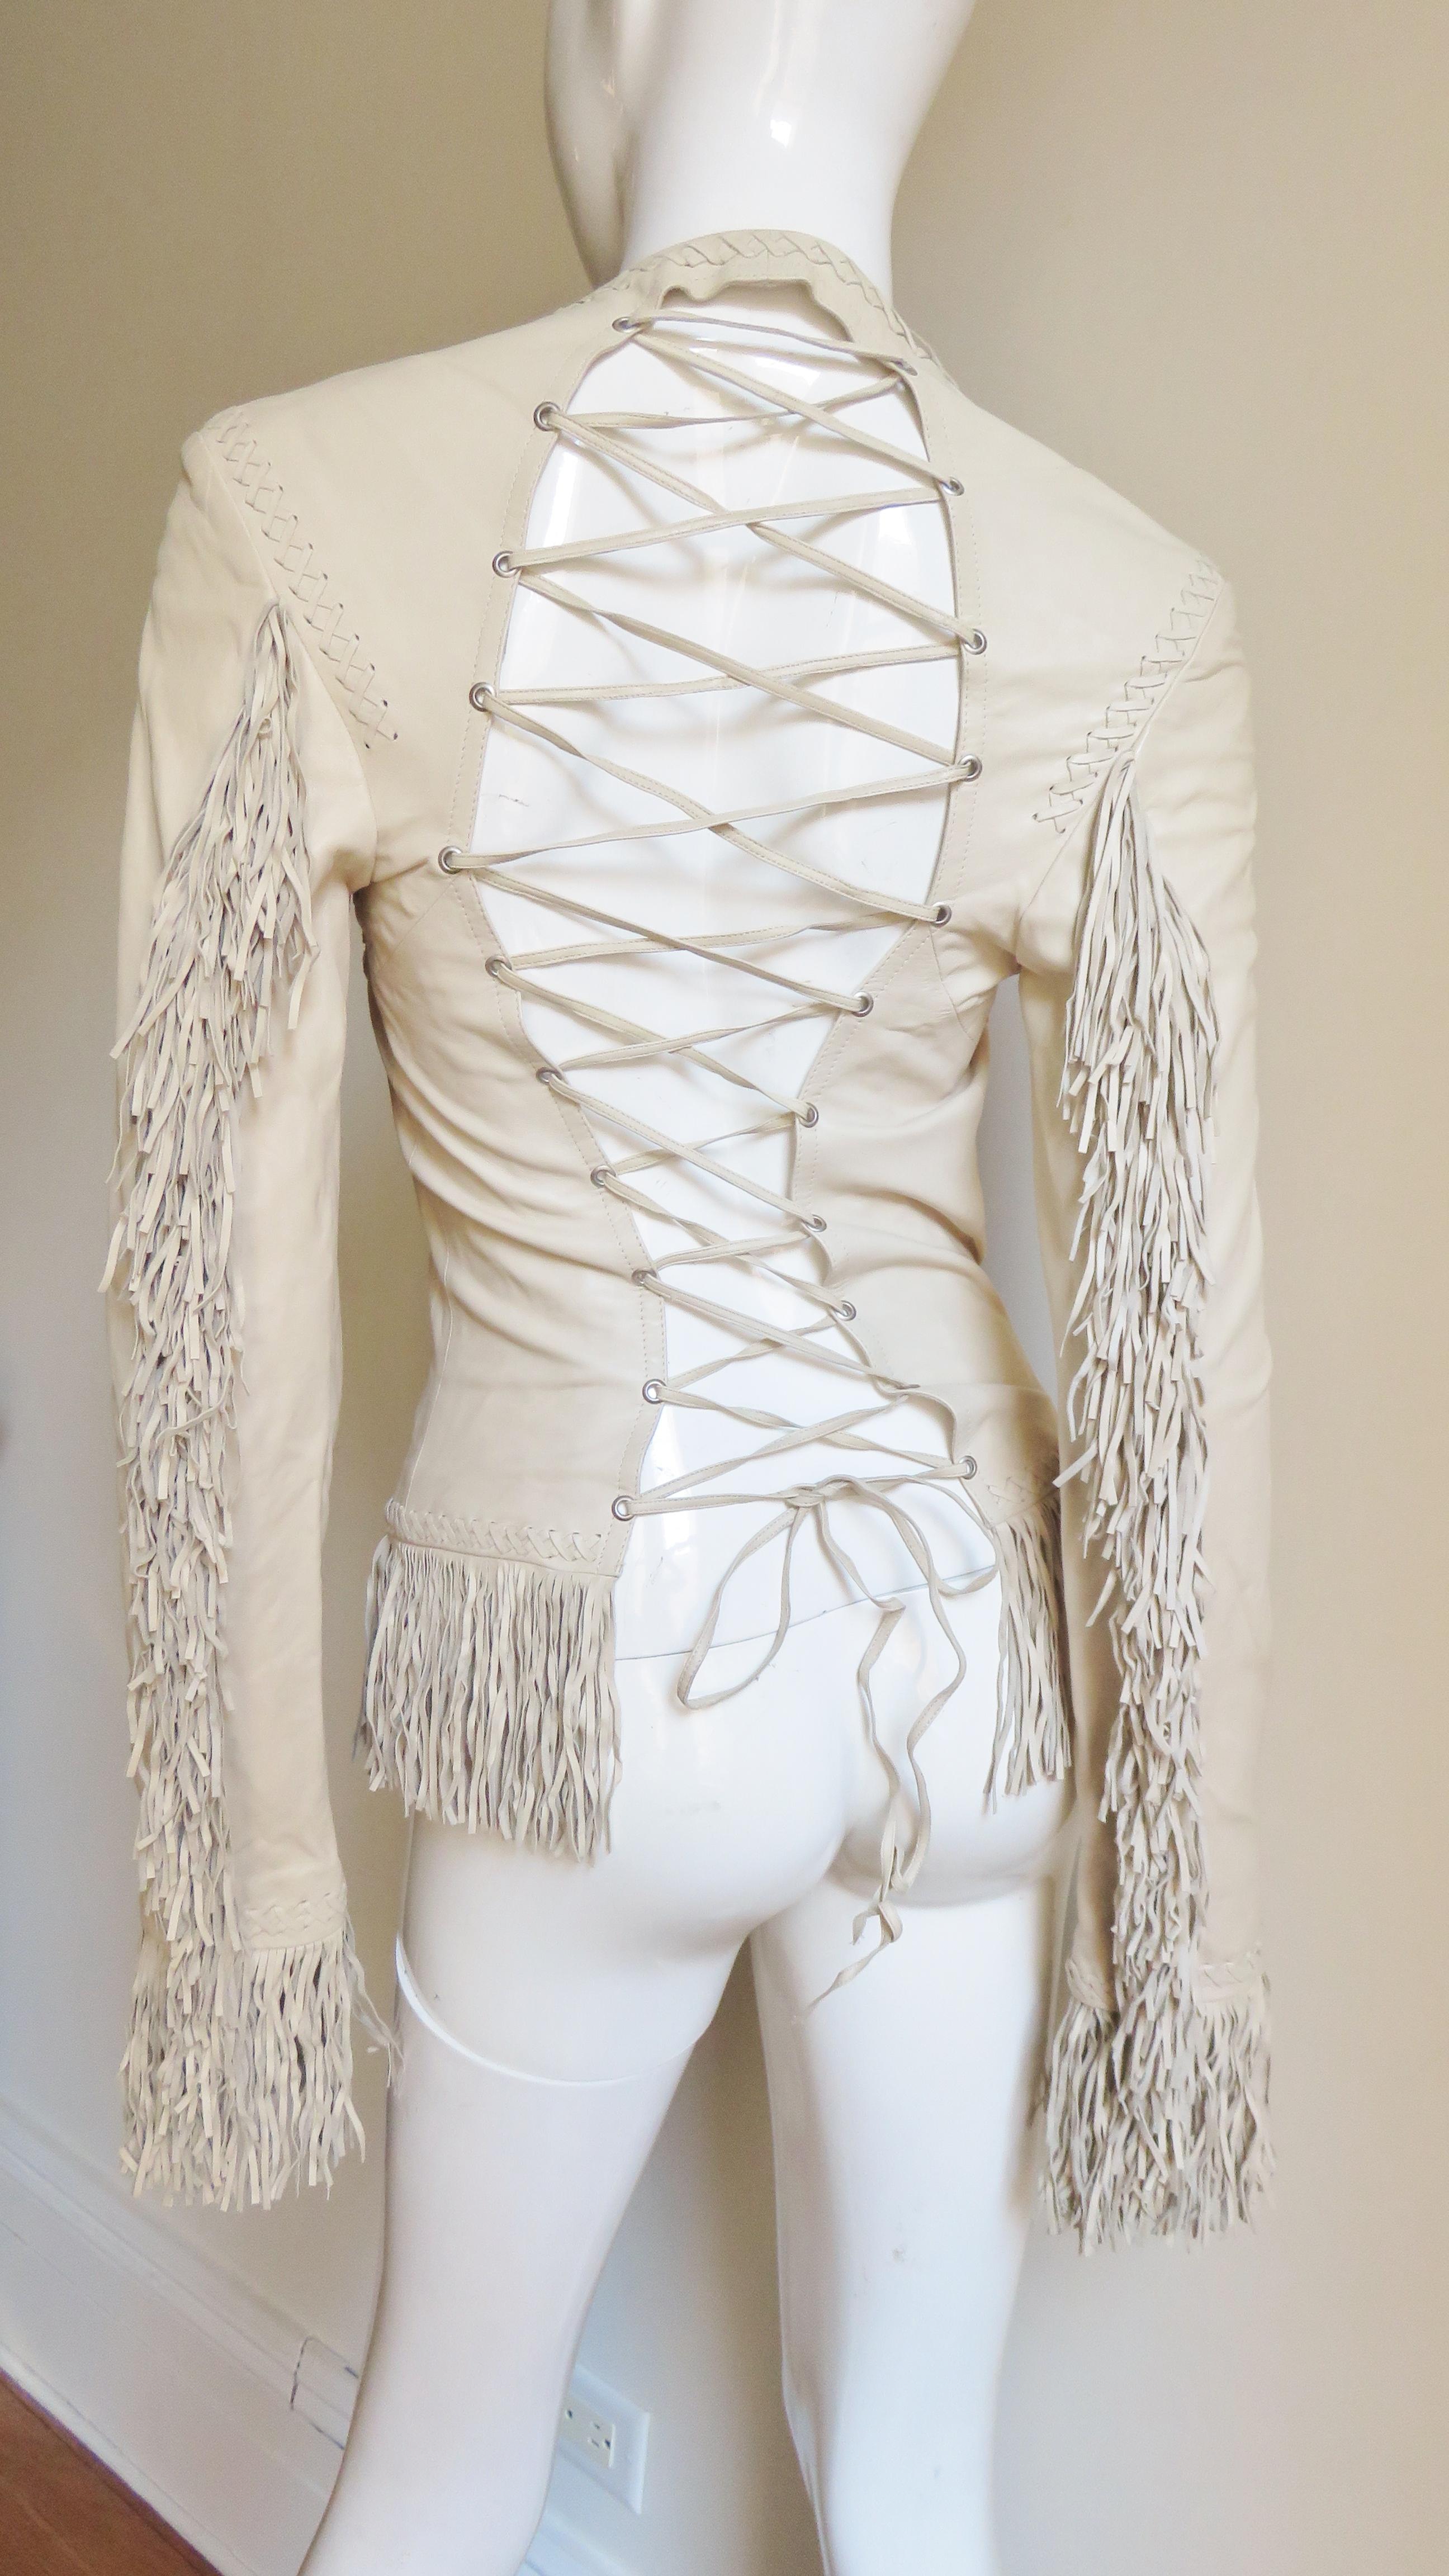 A fabulous soft, supple, off white leather jacket from Gianni Versace. It is fitted with vertical seaming which is highlighted with intricate hand braiding plus 4